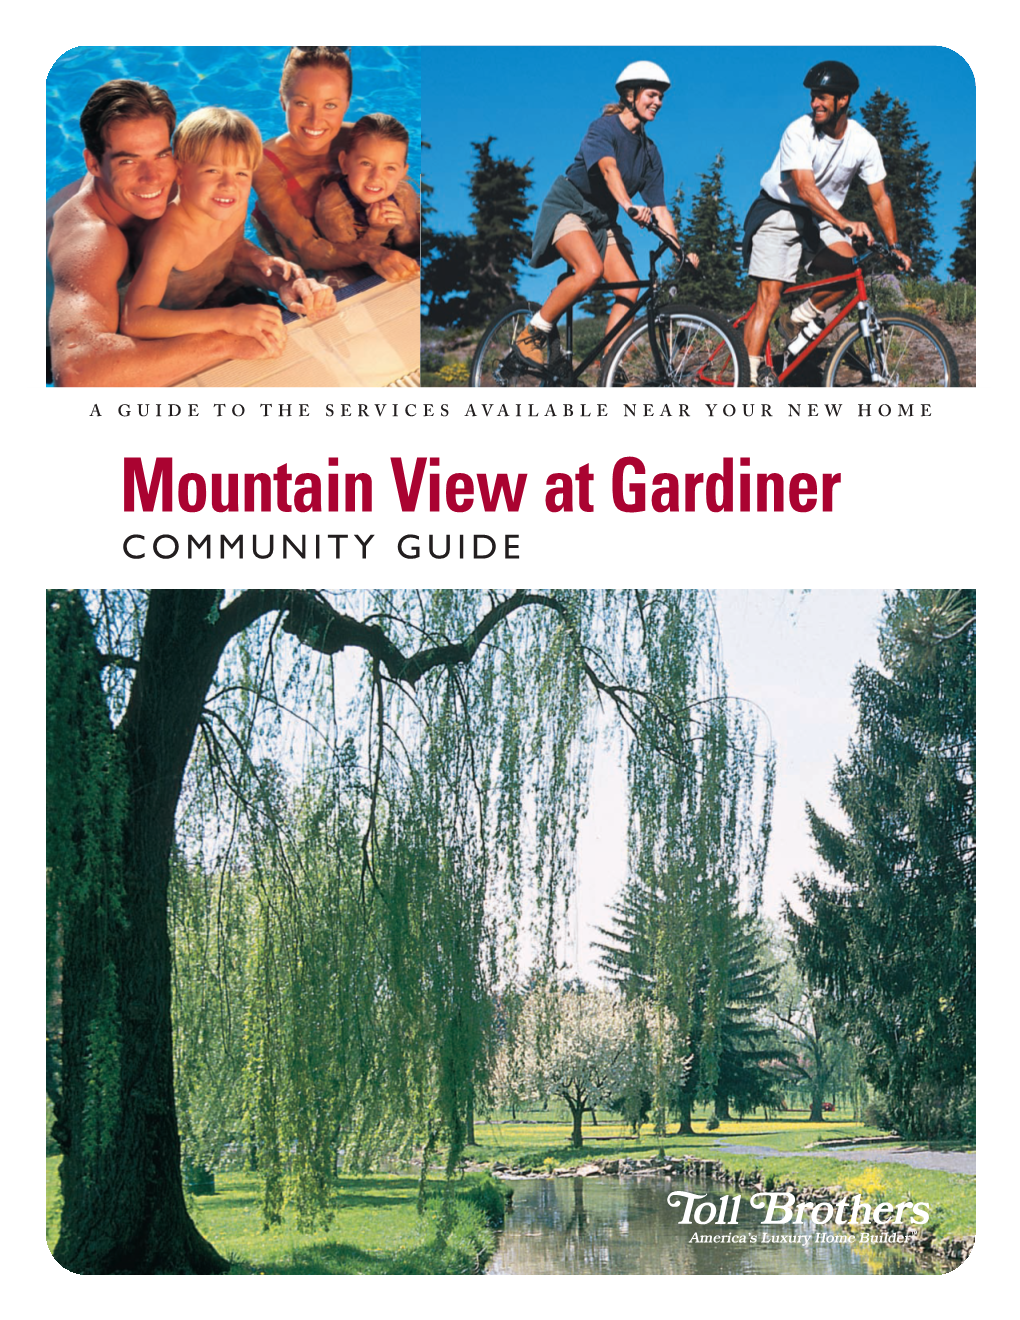 Mountain View at Gardiner COMMUNITY GUIDE Copyright 2007 Toll Brothers, Inc